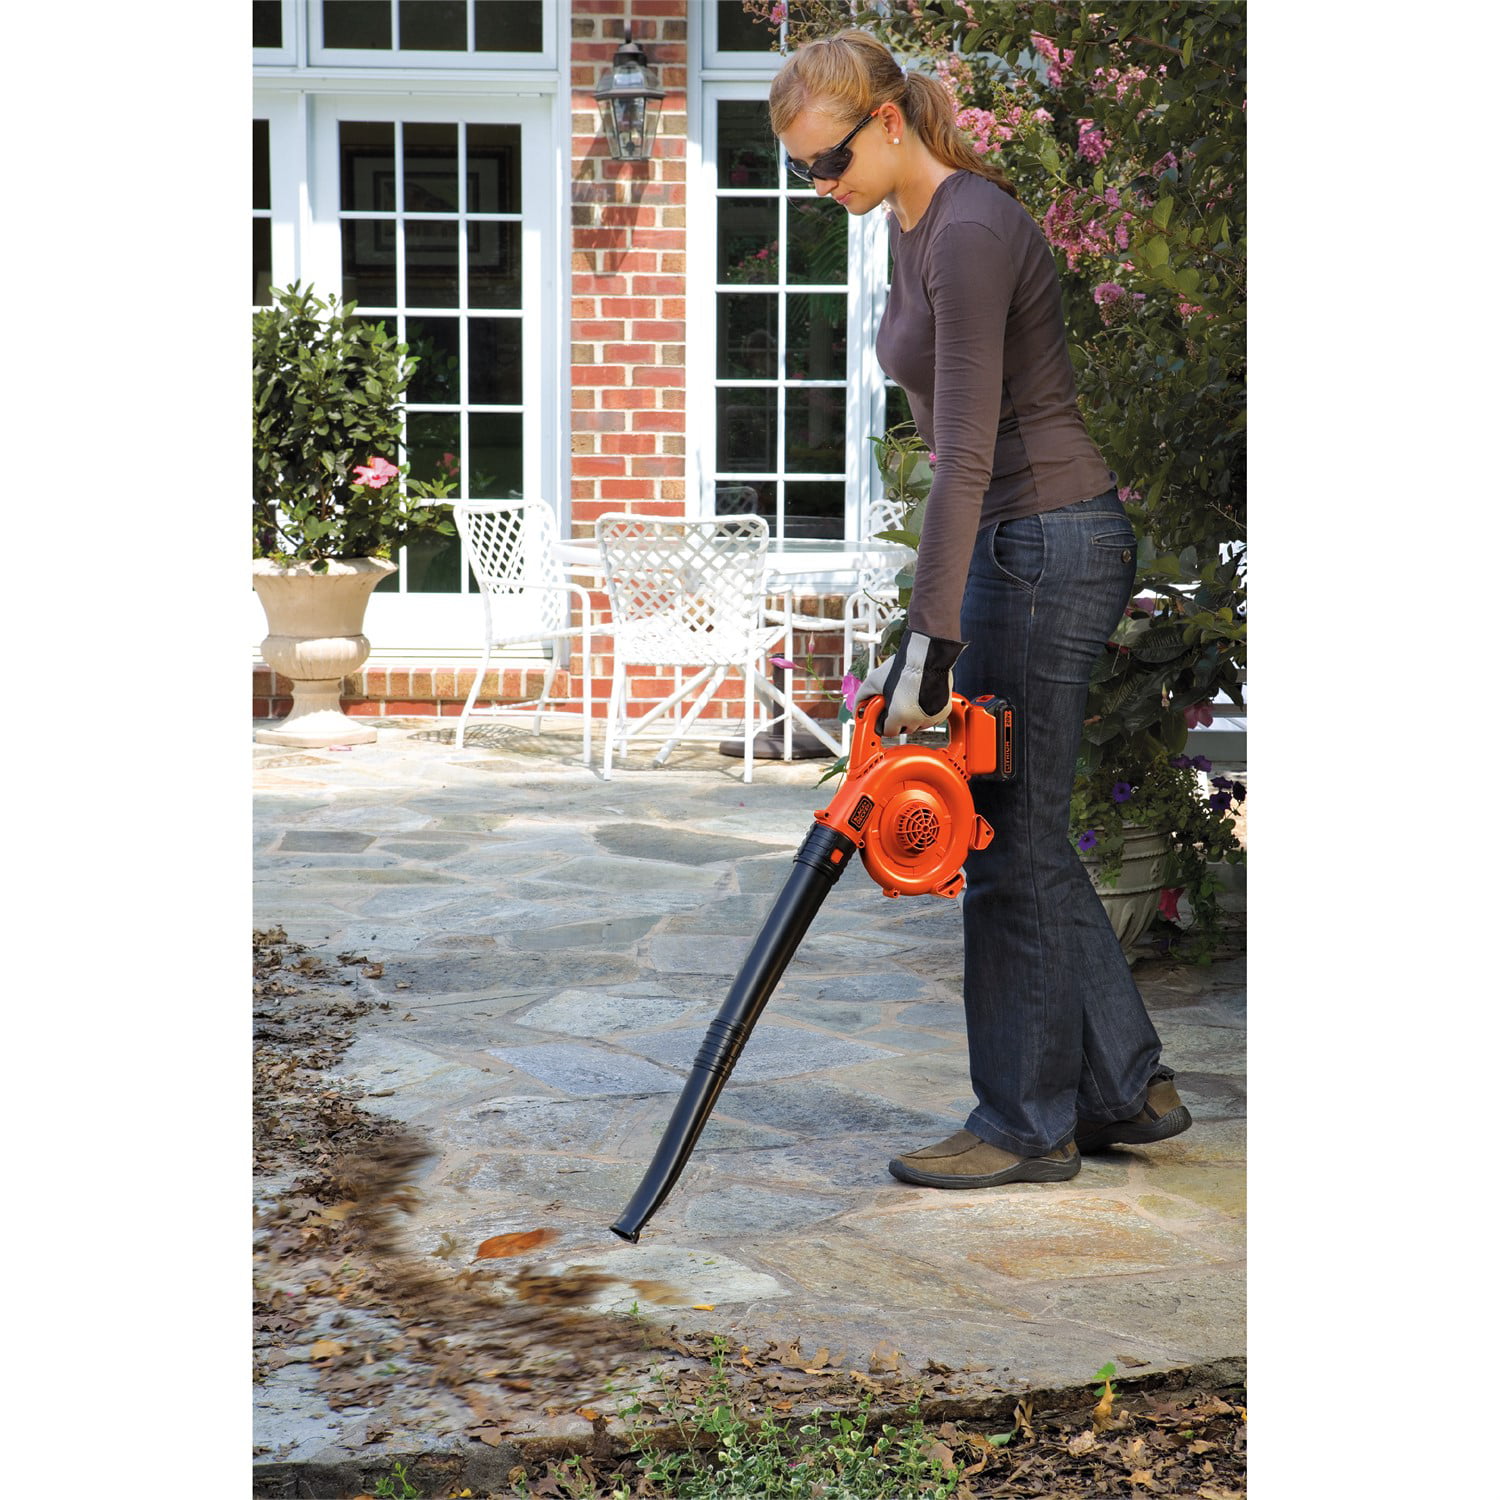 BLACK+DECKER 20V MAX Cordless Sweeper with Power Boost just $49.99 (Reg.  $119) at WOOT!